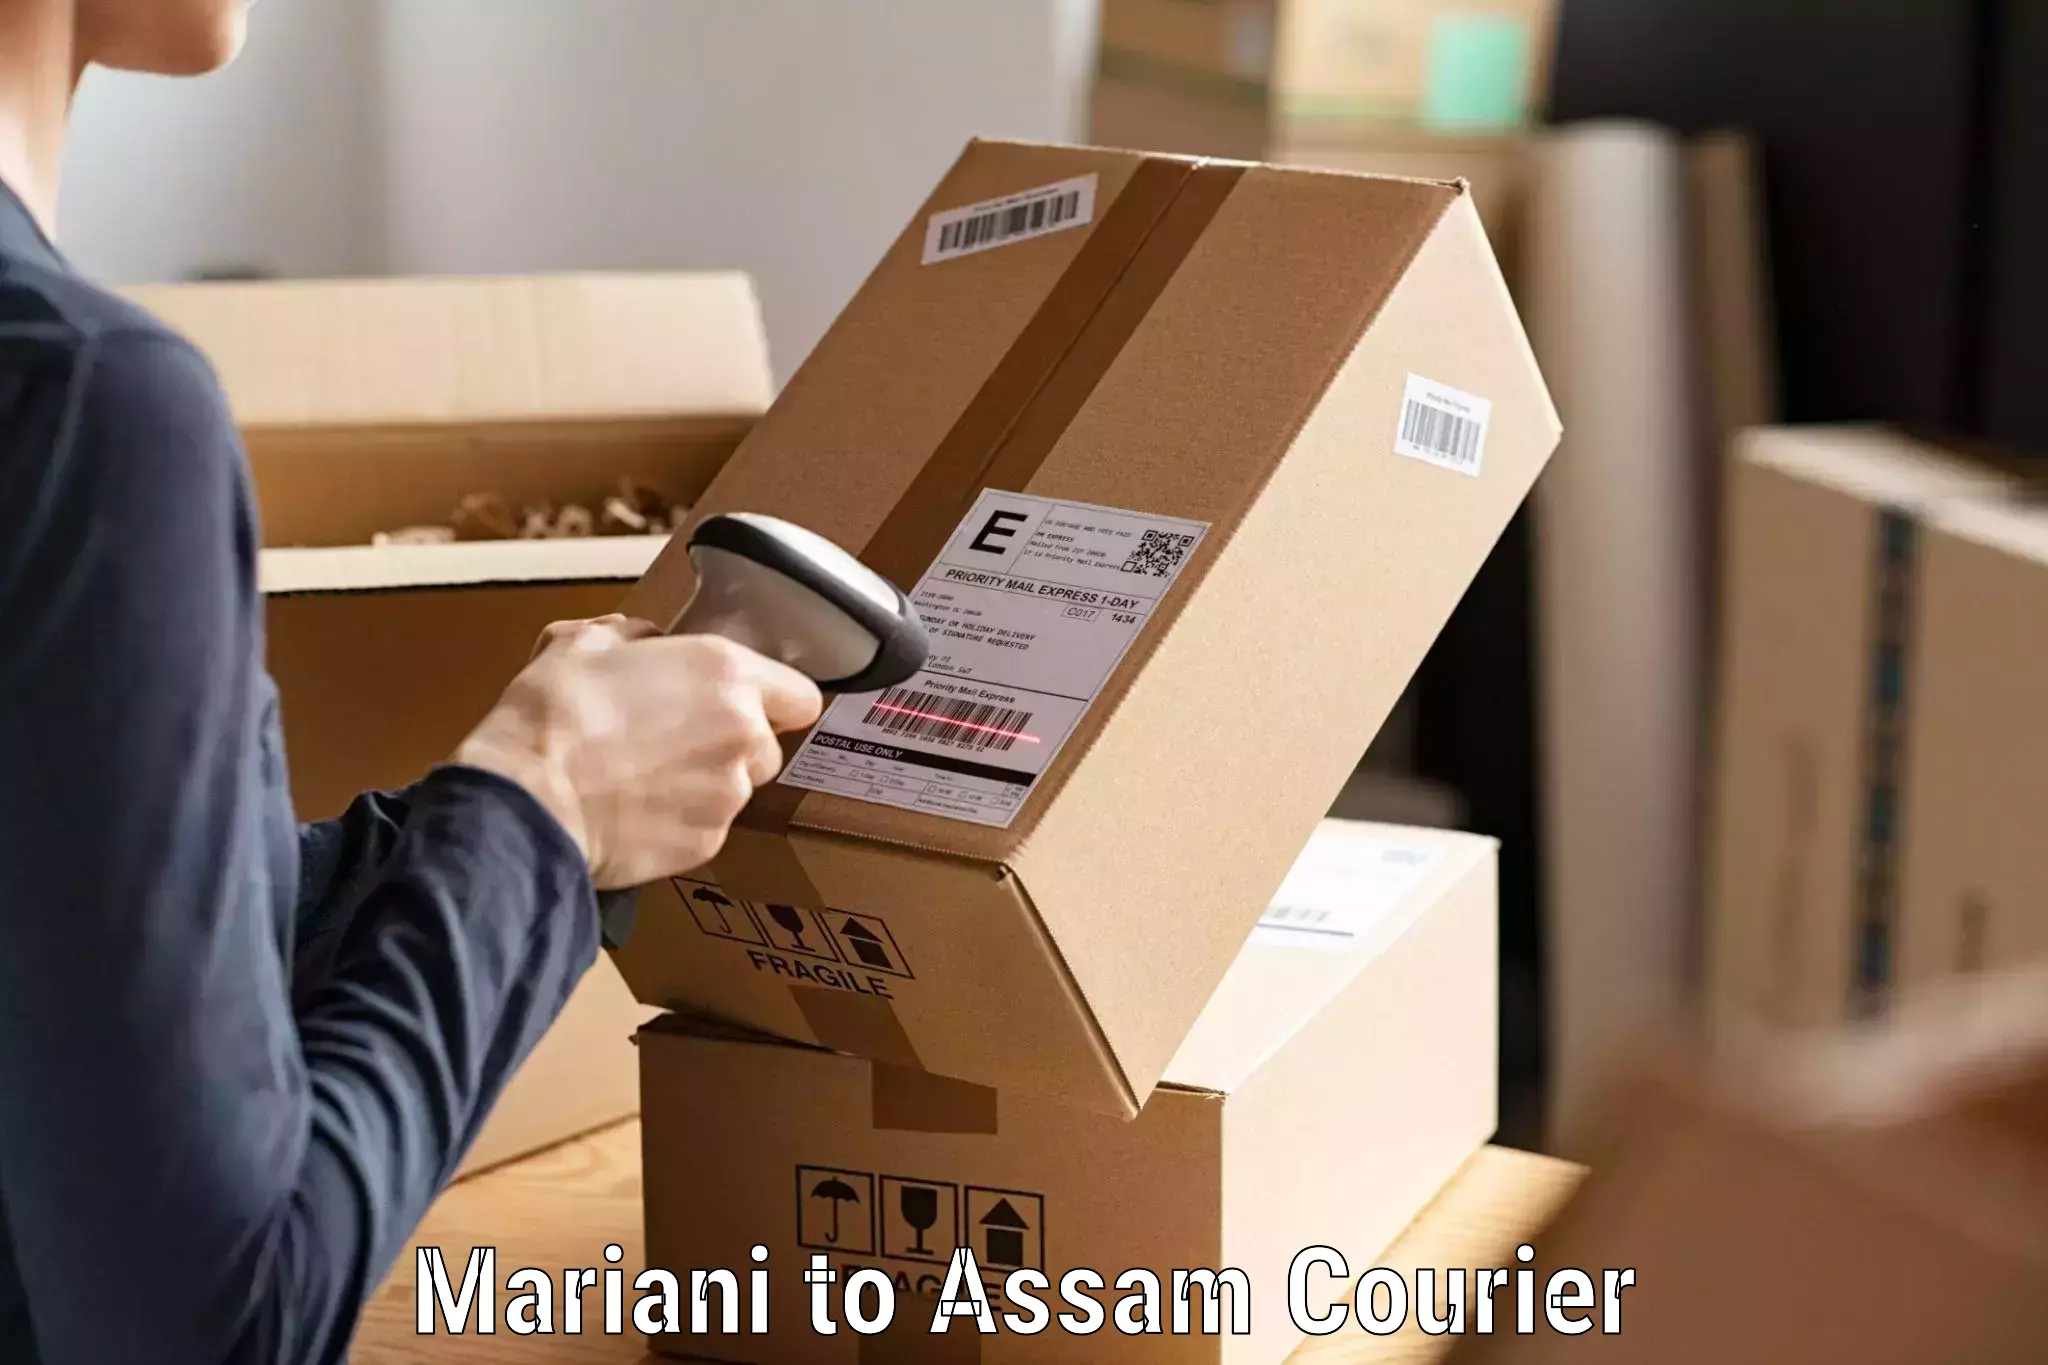 User-friendly courier app Mariani to Lala Assam